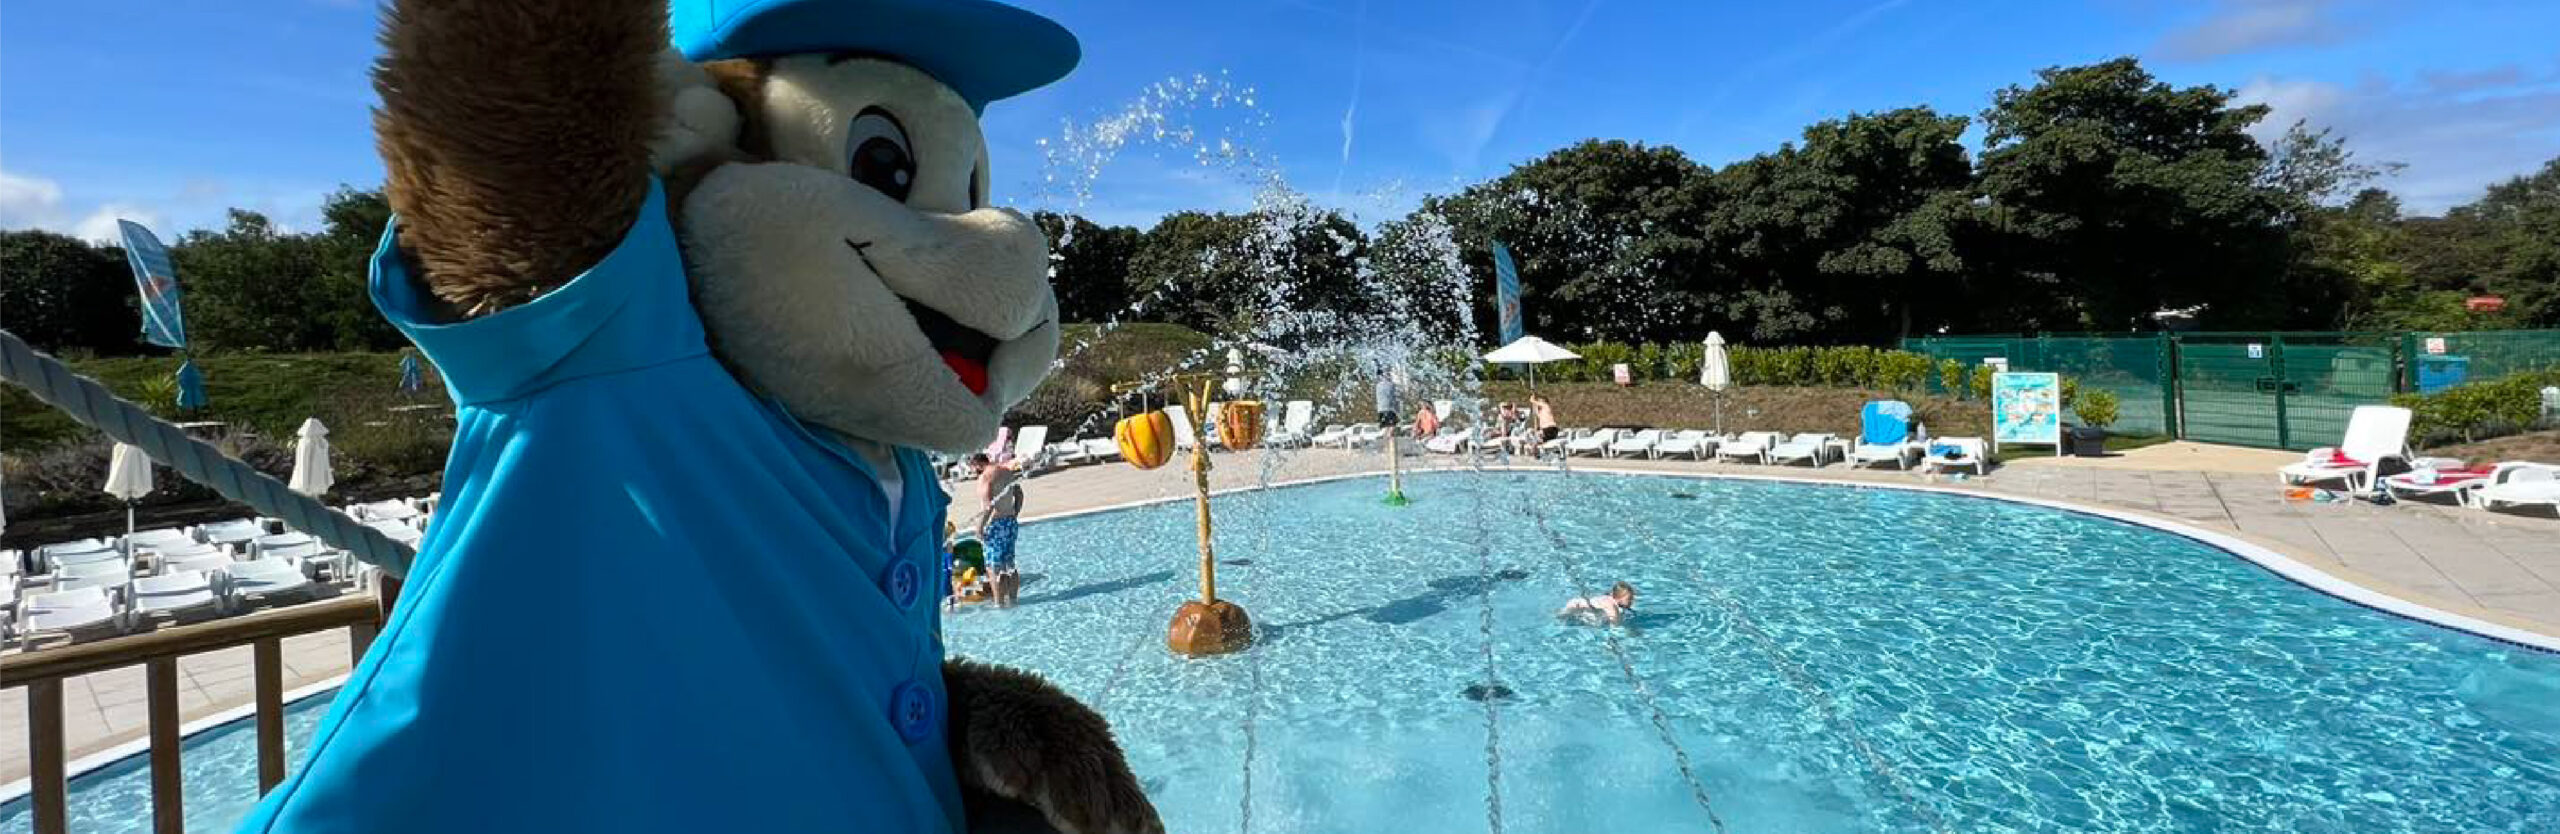 A mascot dressed as a cheerful bear in a blue shirt overlooks a bustling outdoor swimming pool with people enjoying the water and sun loungers around under a clear blue sky.